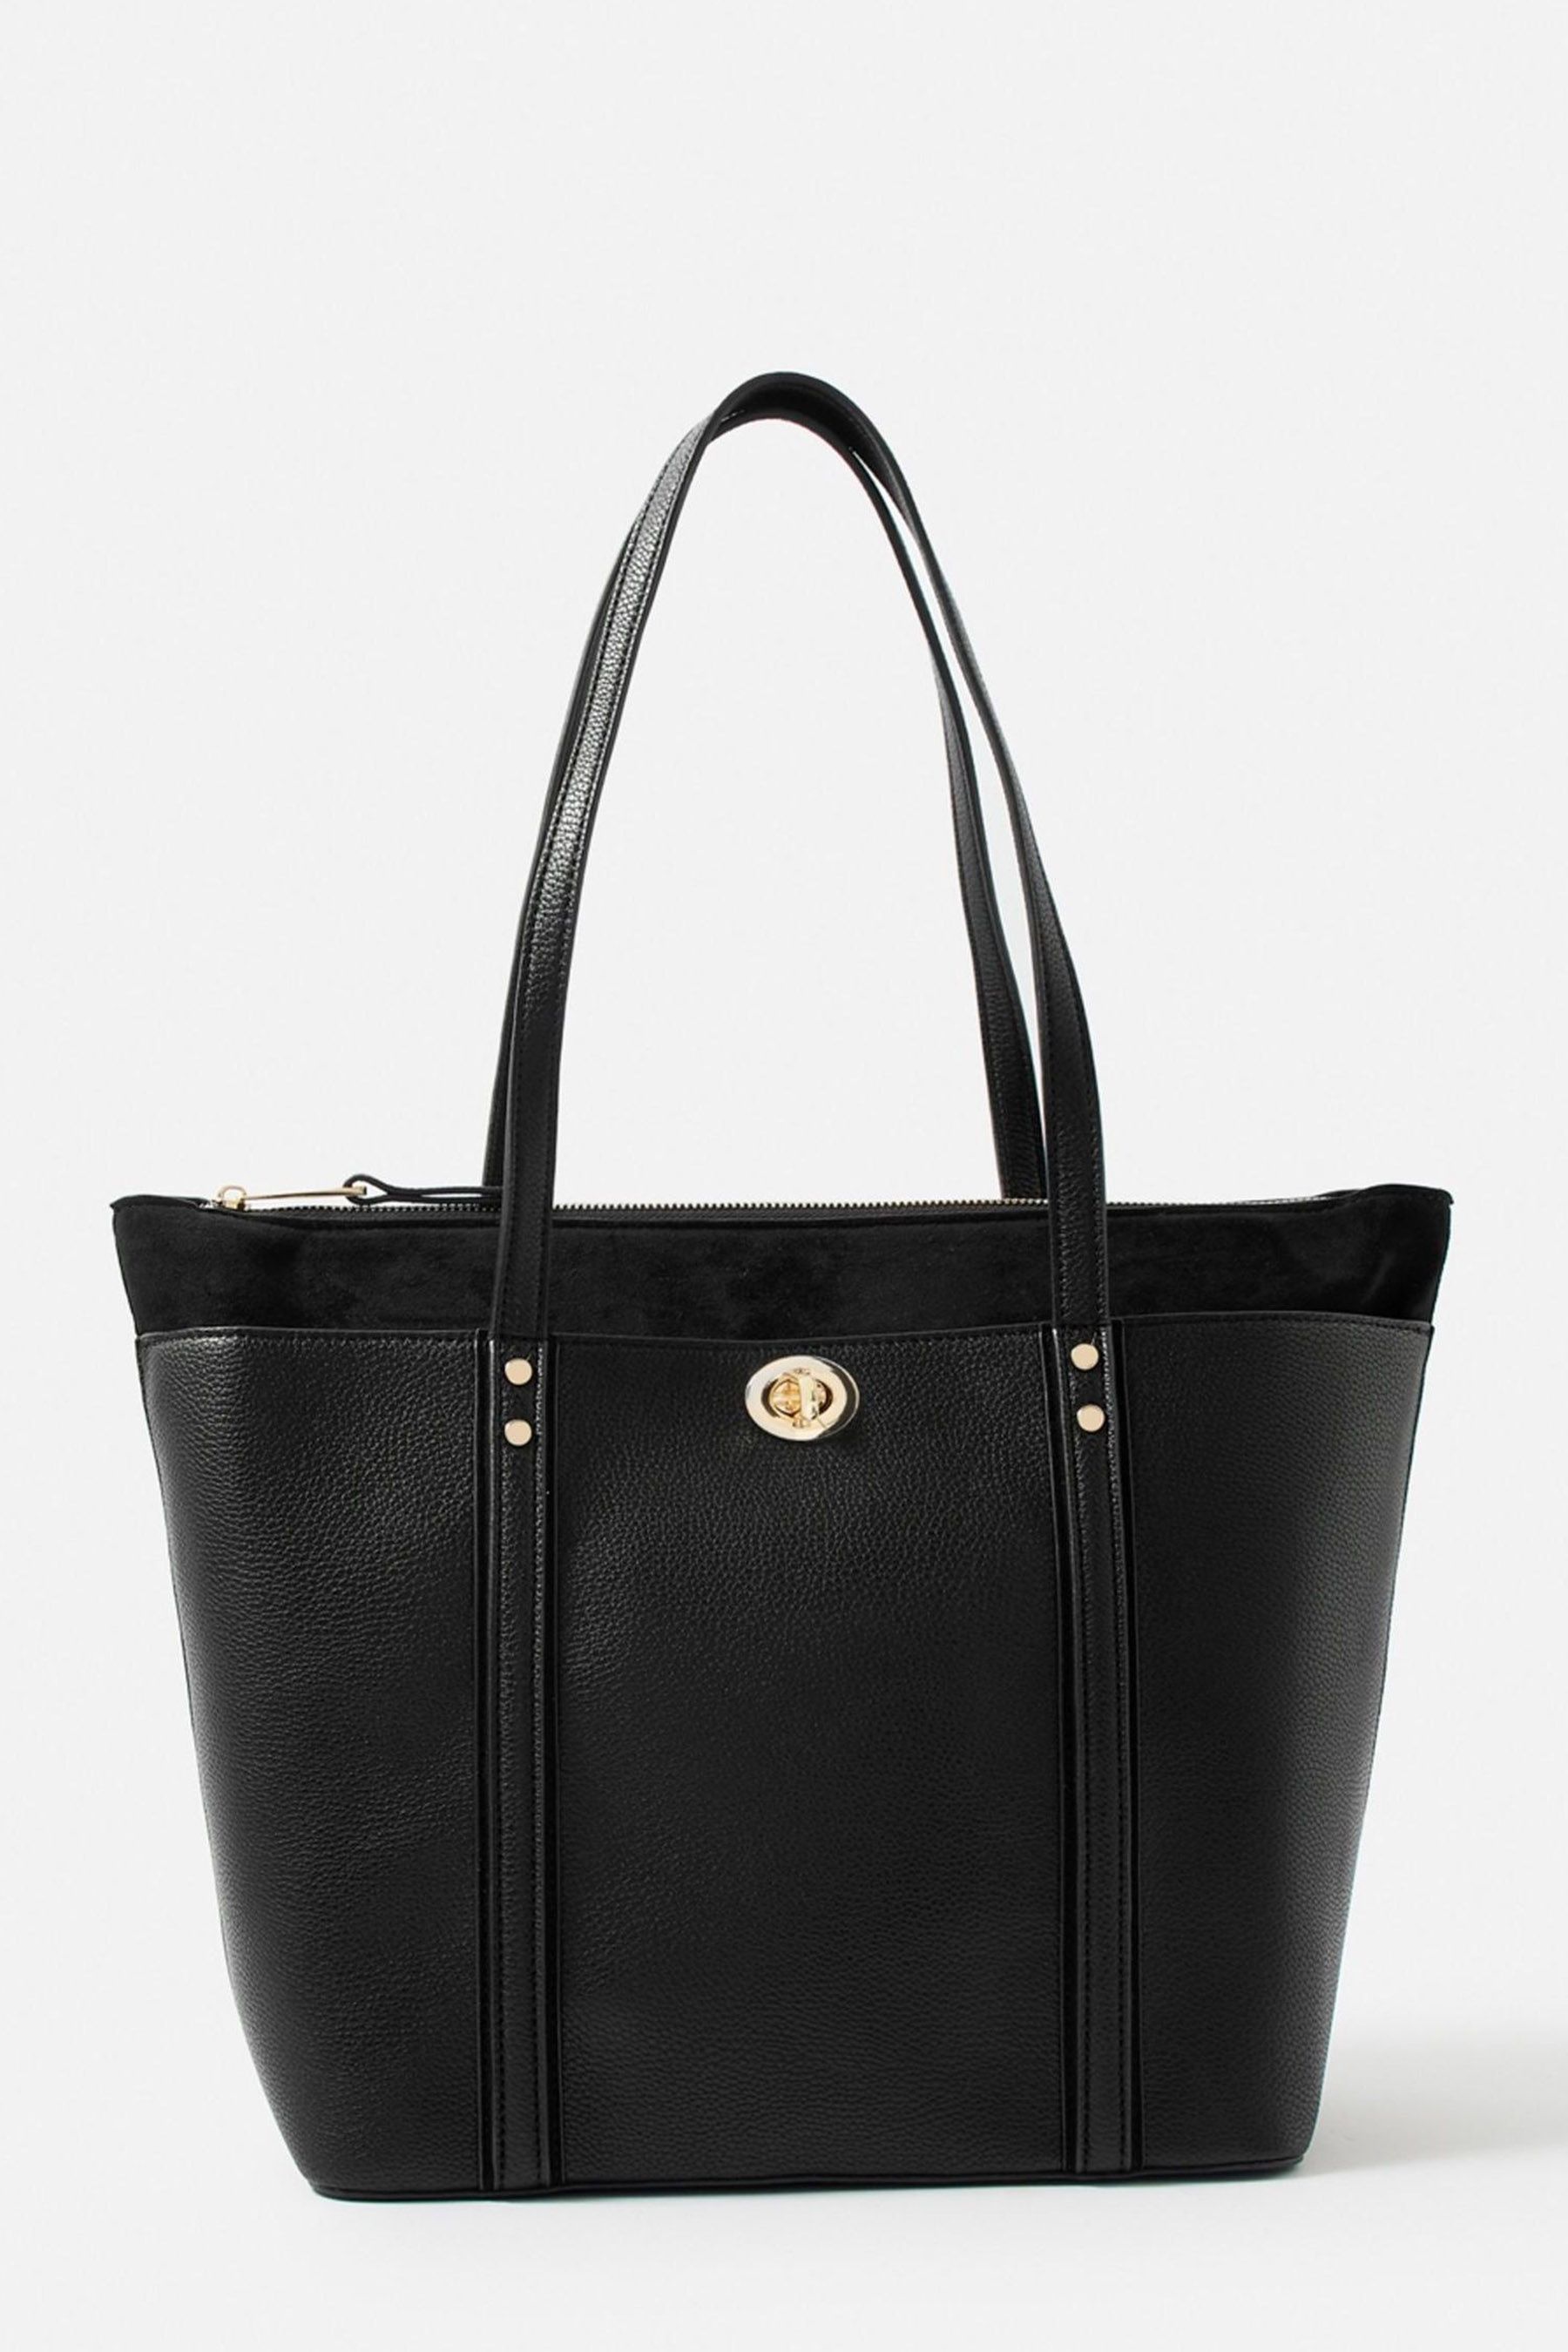 Buy Accessorize Black Maddox Tote Bag from the Next UK online shop